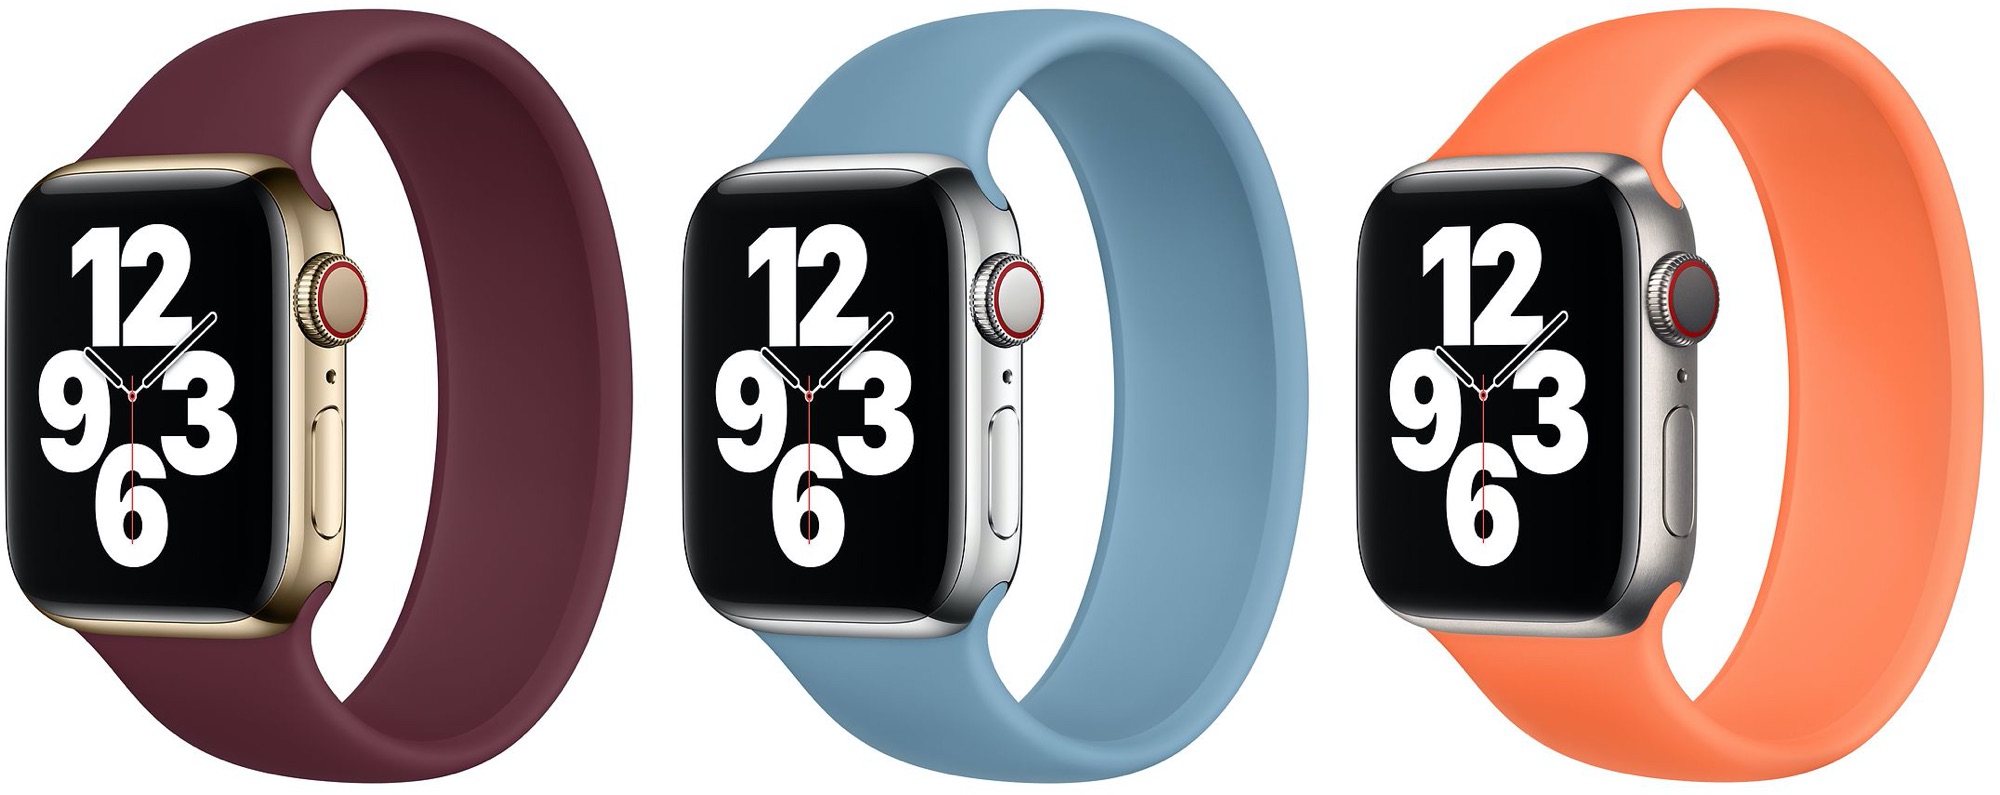 Apple Watch Solo Loop band new colors